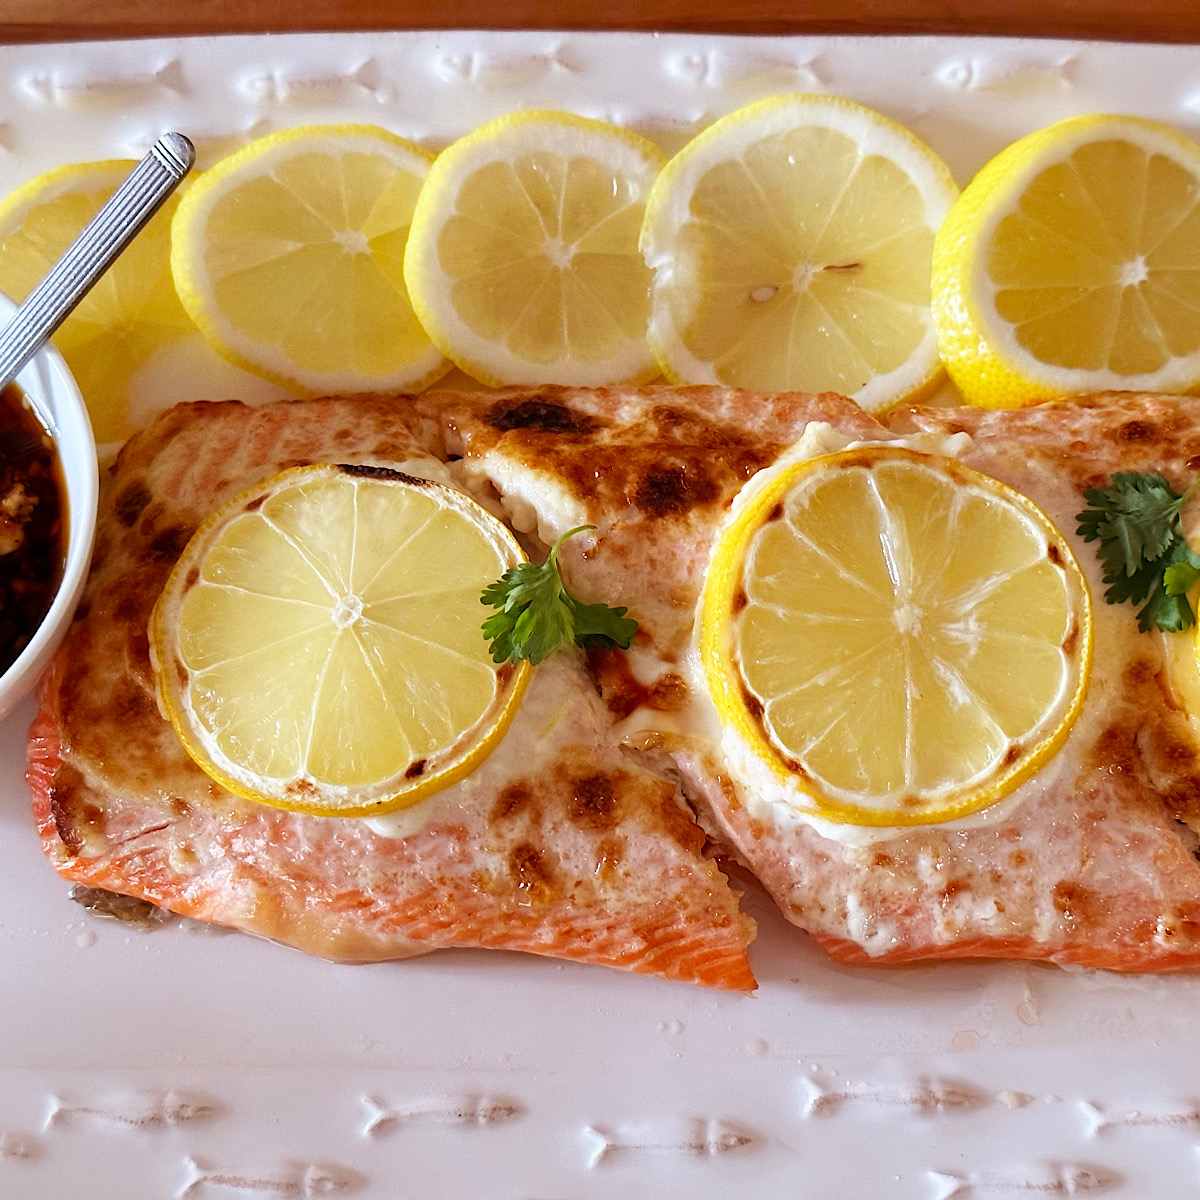 2 roasted salmon filets with mayonnaise and lemon slices on top.